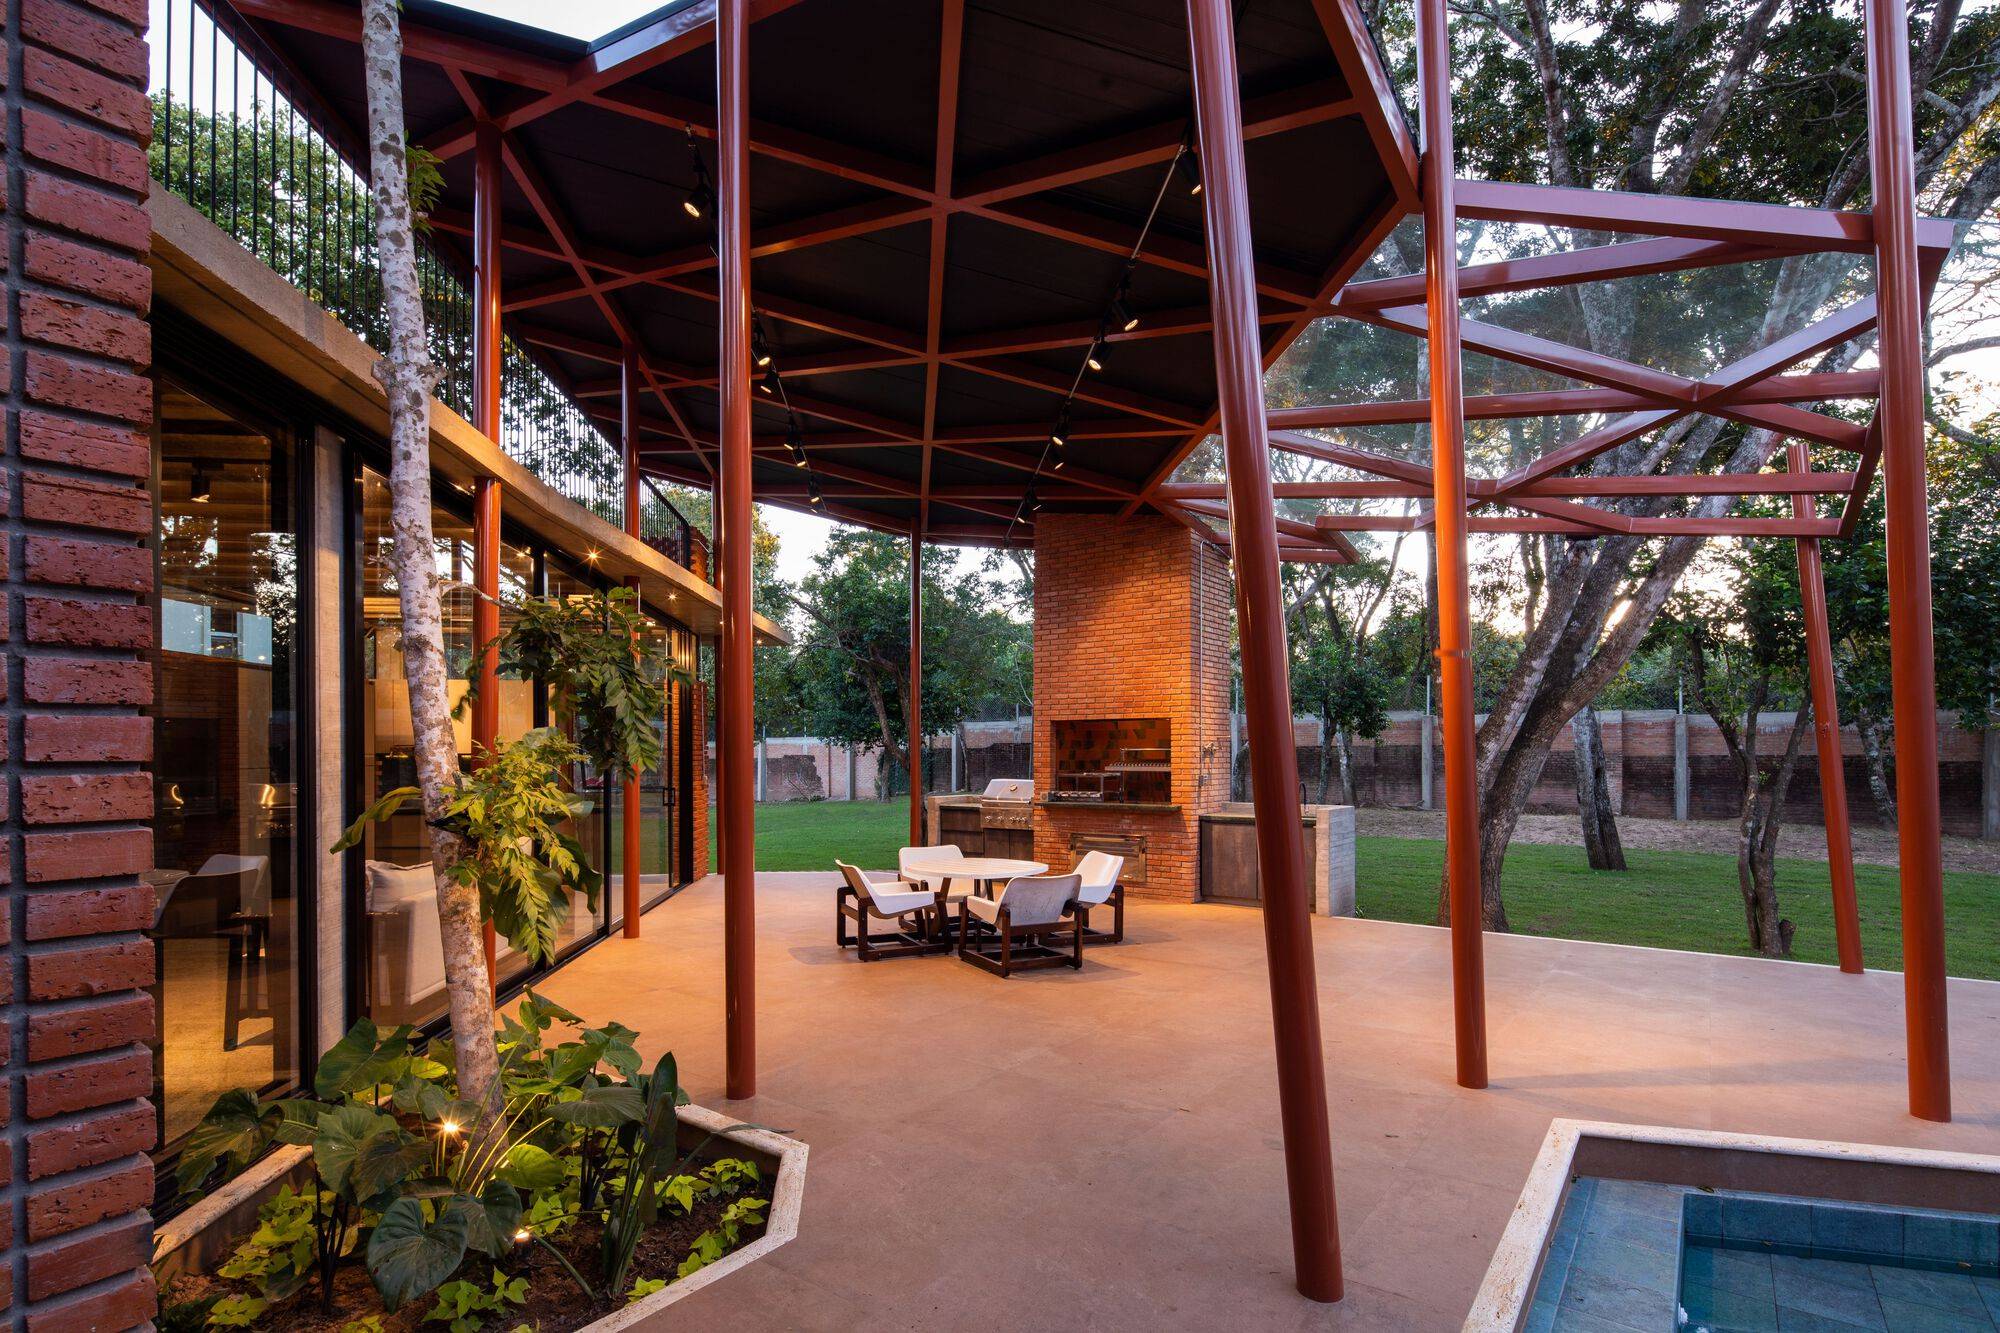 Metal beams of the structure offers ample support for teh upper level while creating an open, lovely sitting area